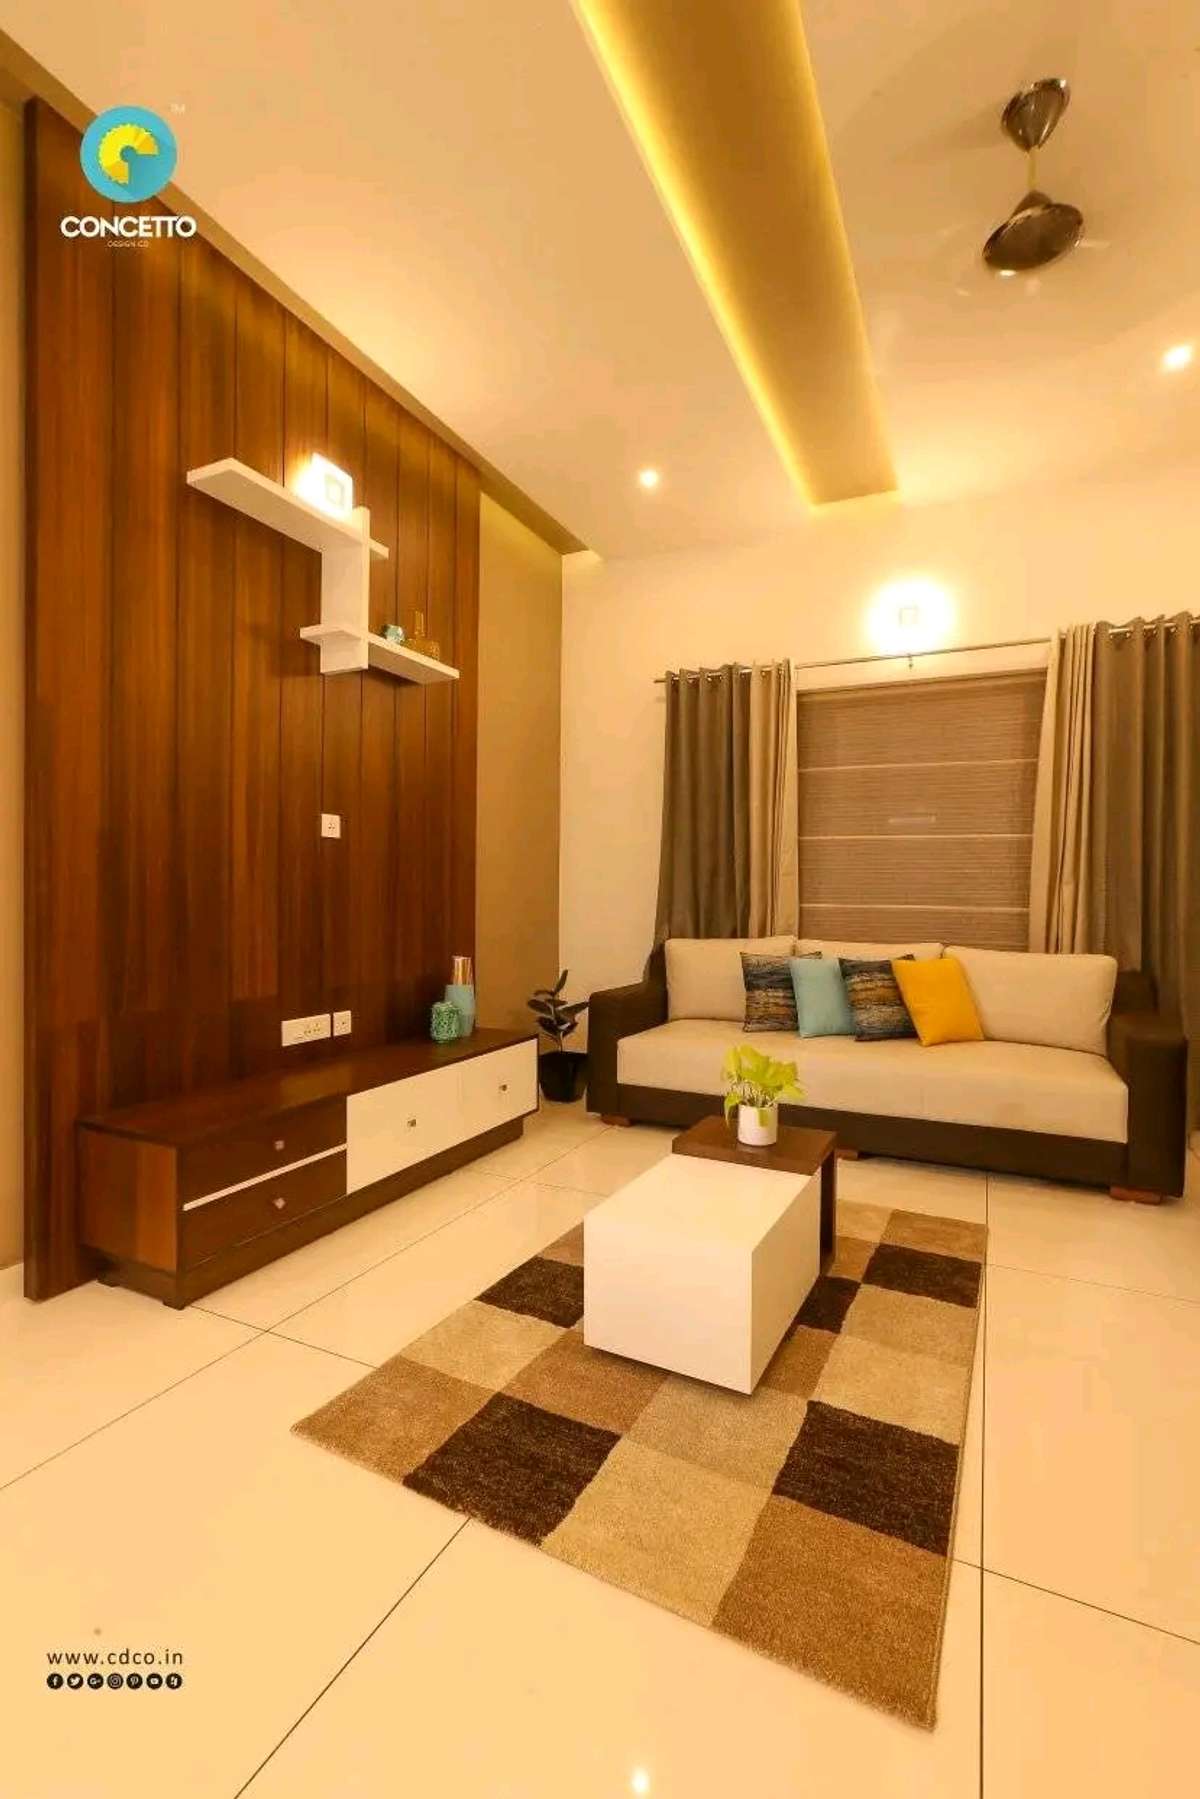 Furniture, Living, Lighting, Table, Storage Designs by Architect Concetto Design Co, Kozhikode | Kolo